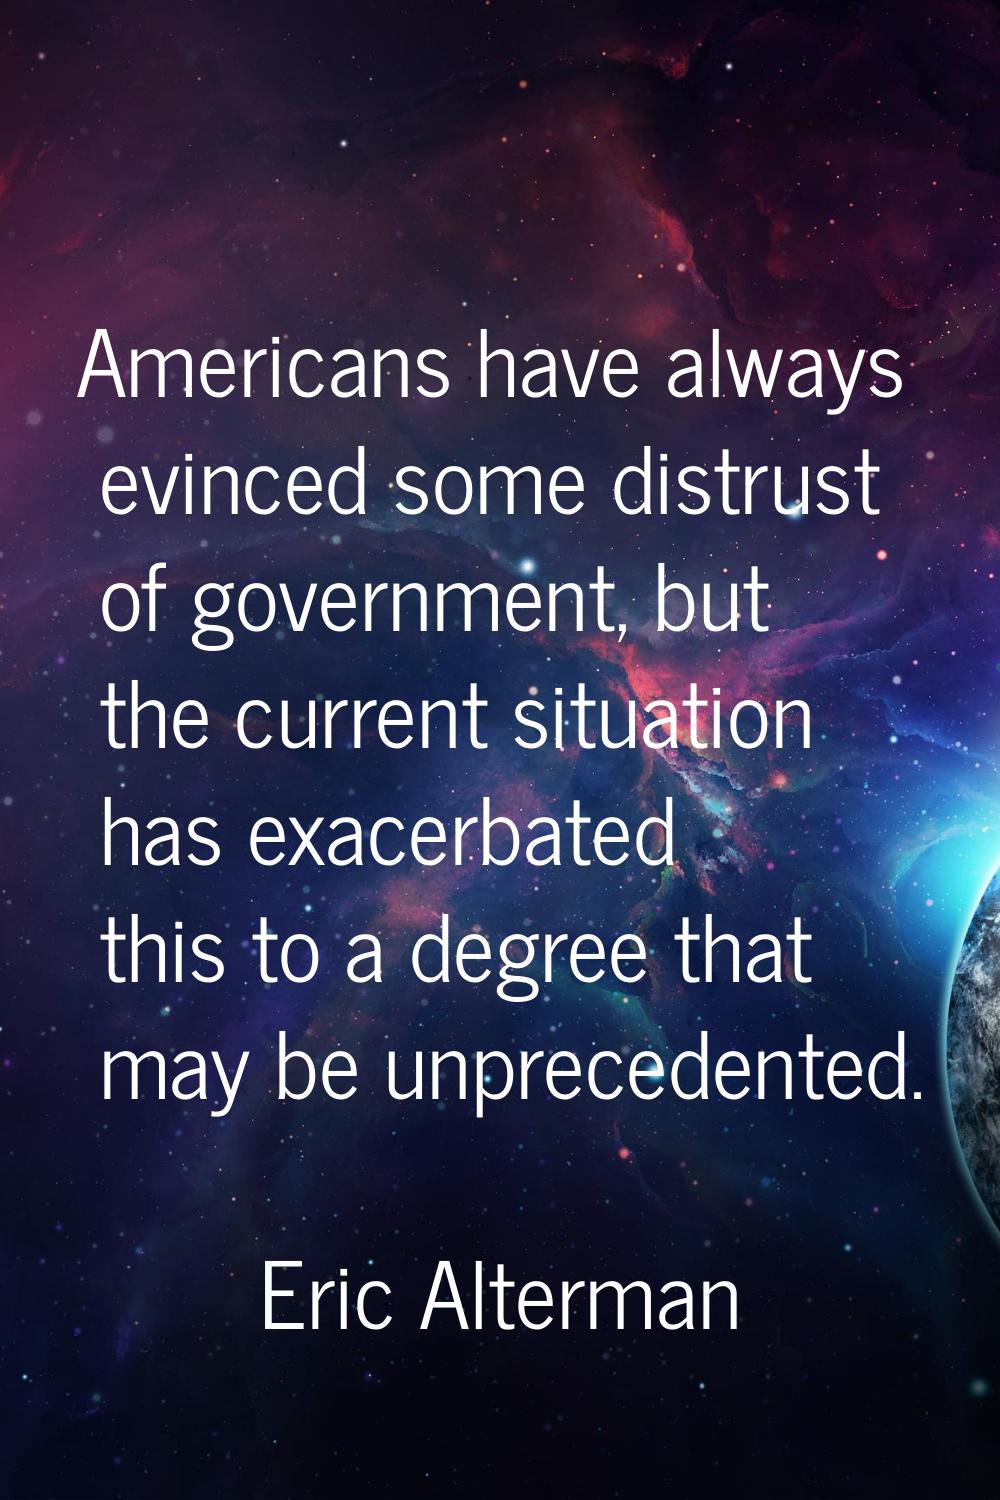 Americans have always evinced some distrust of government, but the current situation has exacerbate